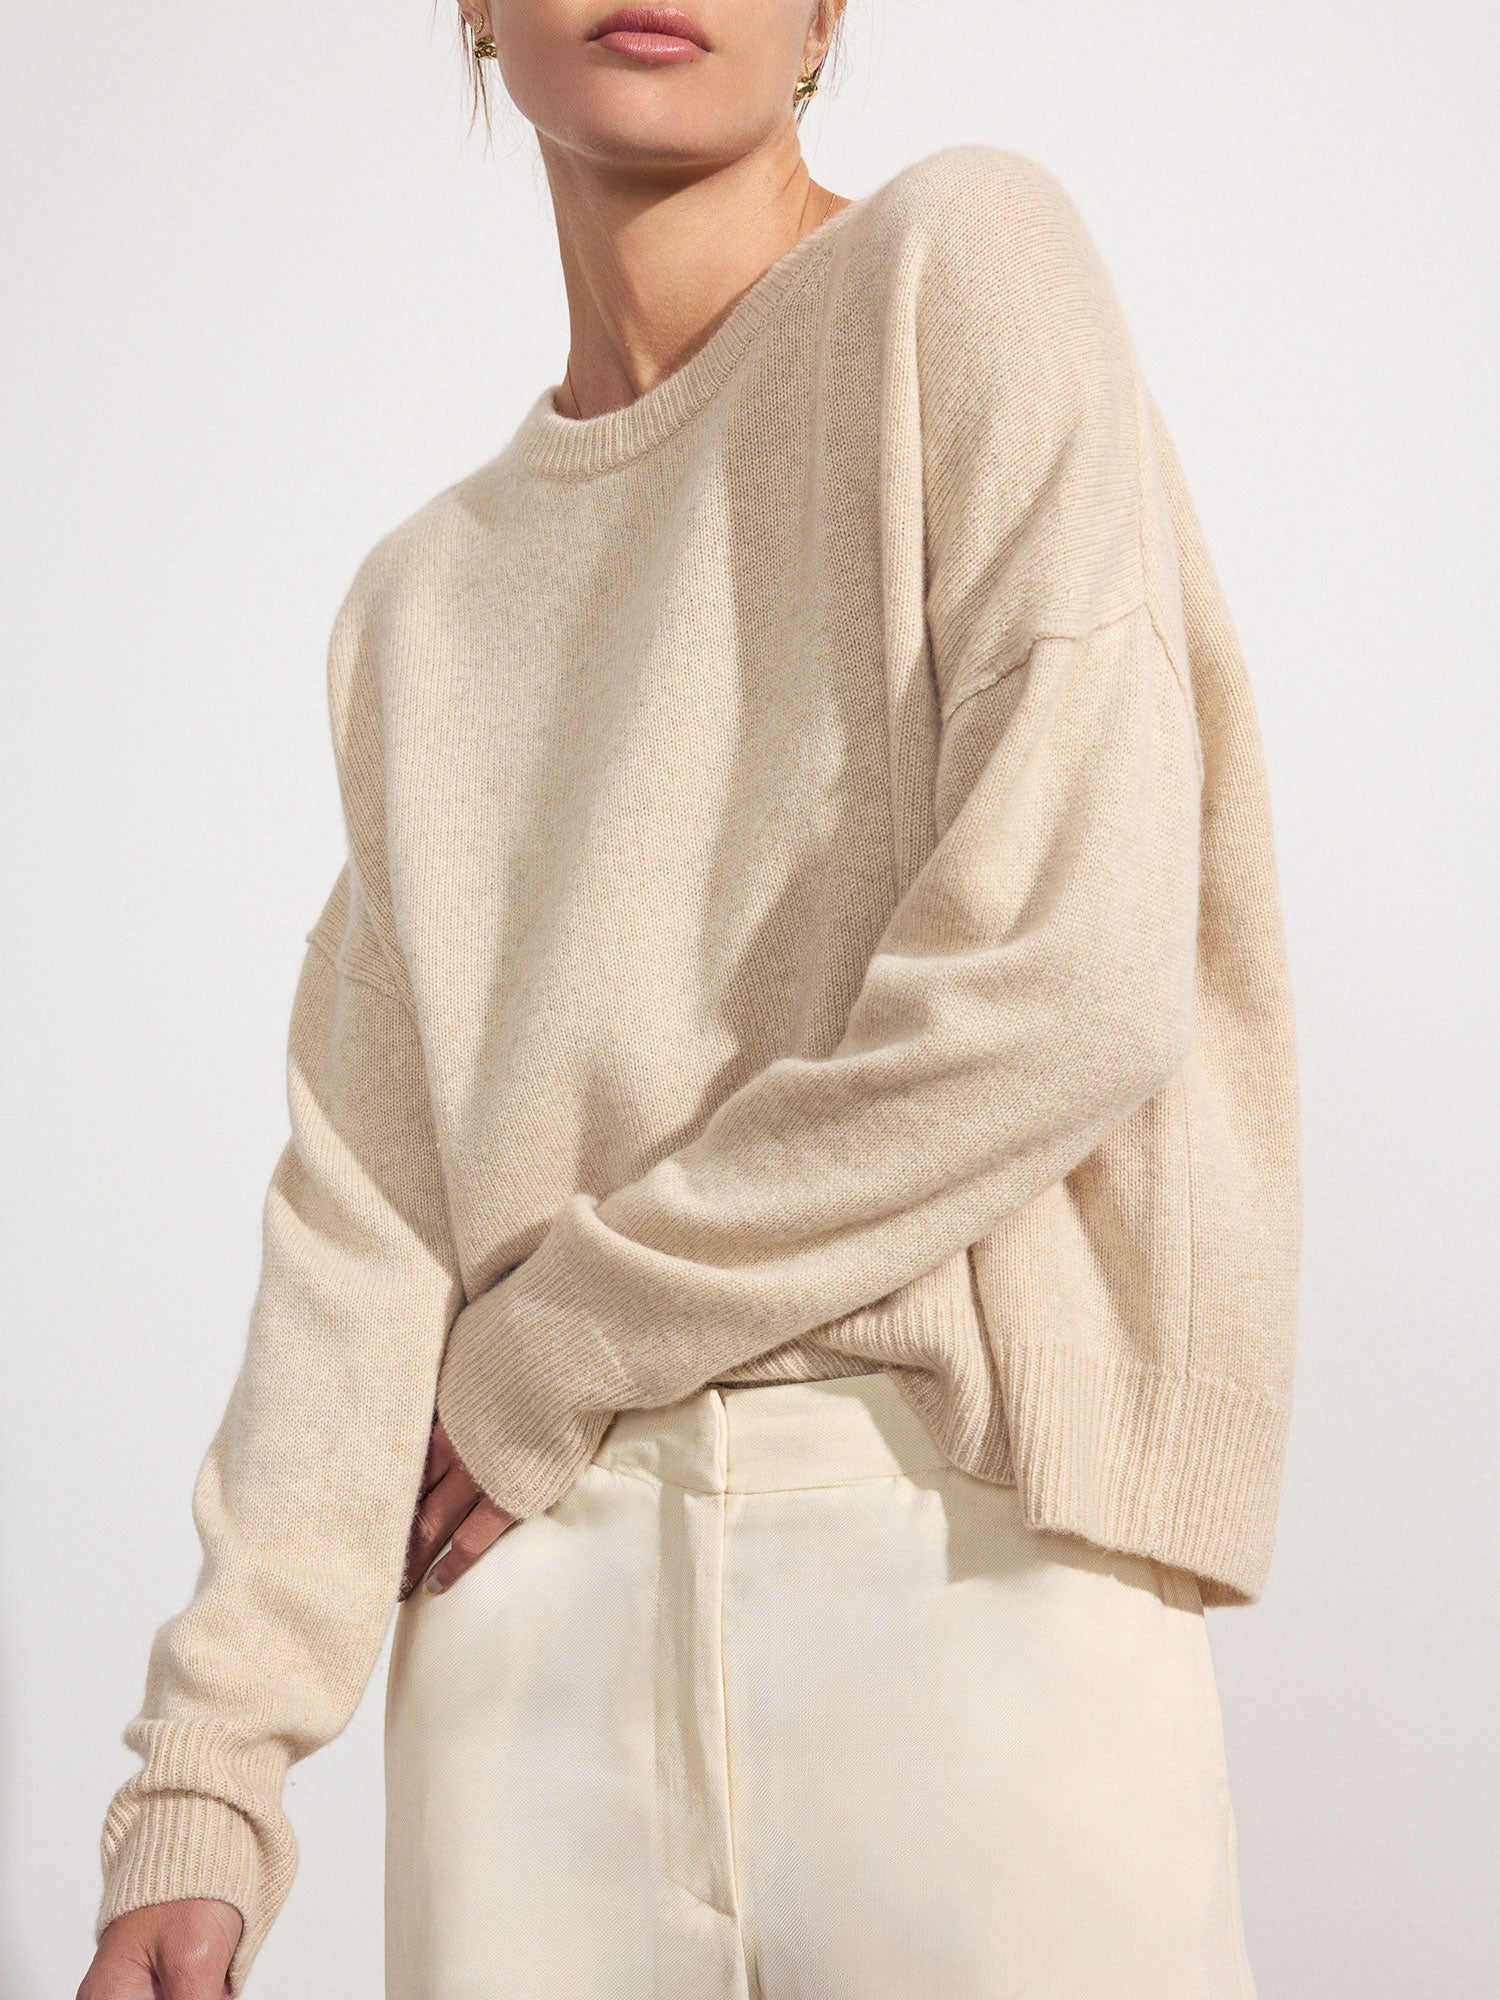 Everyday cashmere crewneck ivory sweater front view